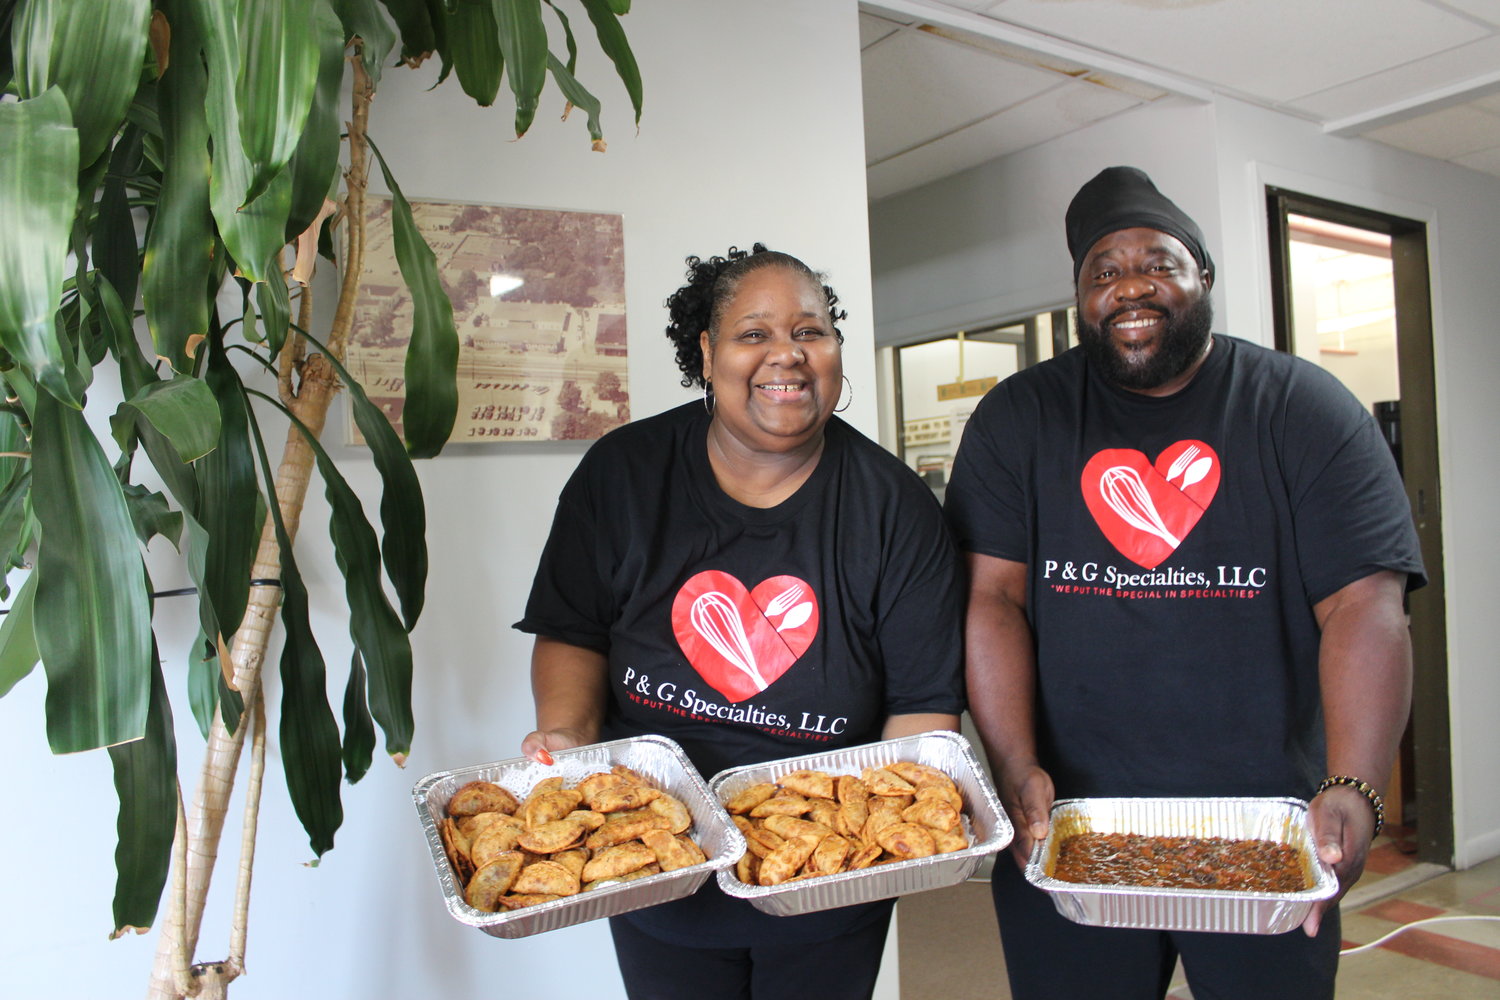 Regina Hunt and Paul Coffey, who are launching P & G Specialties LLC,  show off their culinary skills: Hunt’s savory empanadas and Coffey’s bean dish. Different variations are offered, and yellow rice and dipping sauce are also their creations.